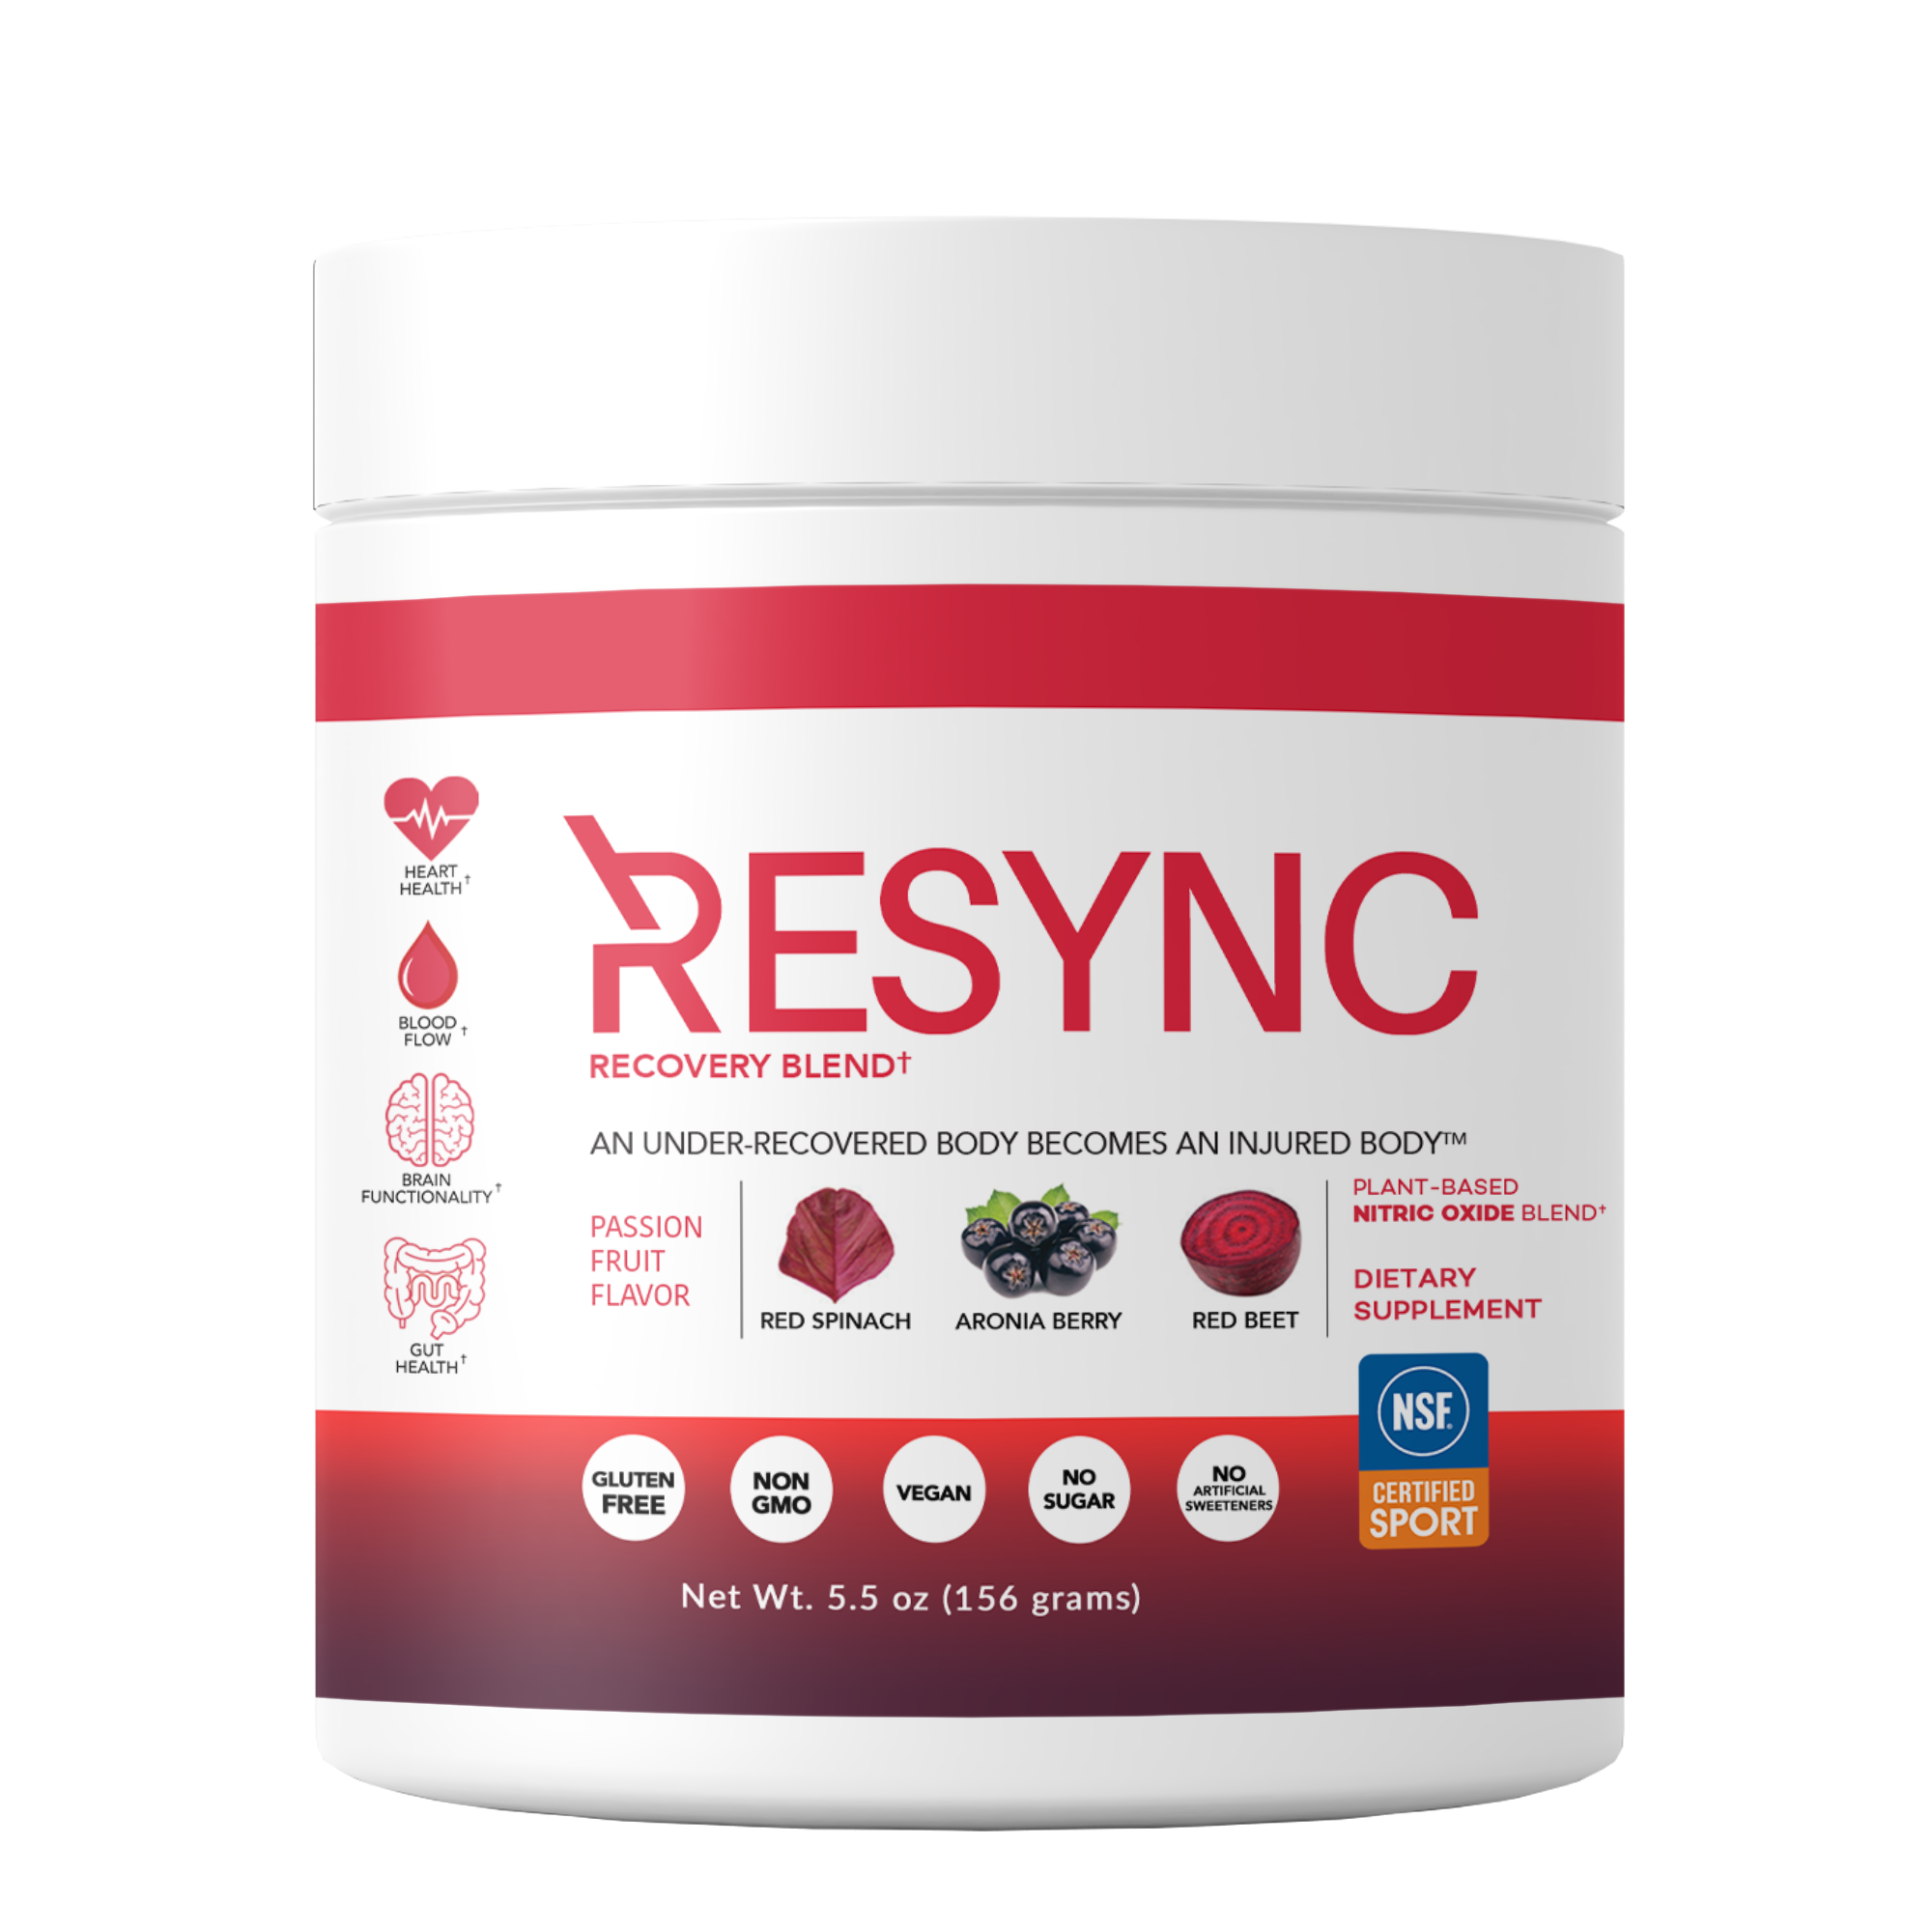 Resync Recovery freeshipping - Resync